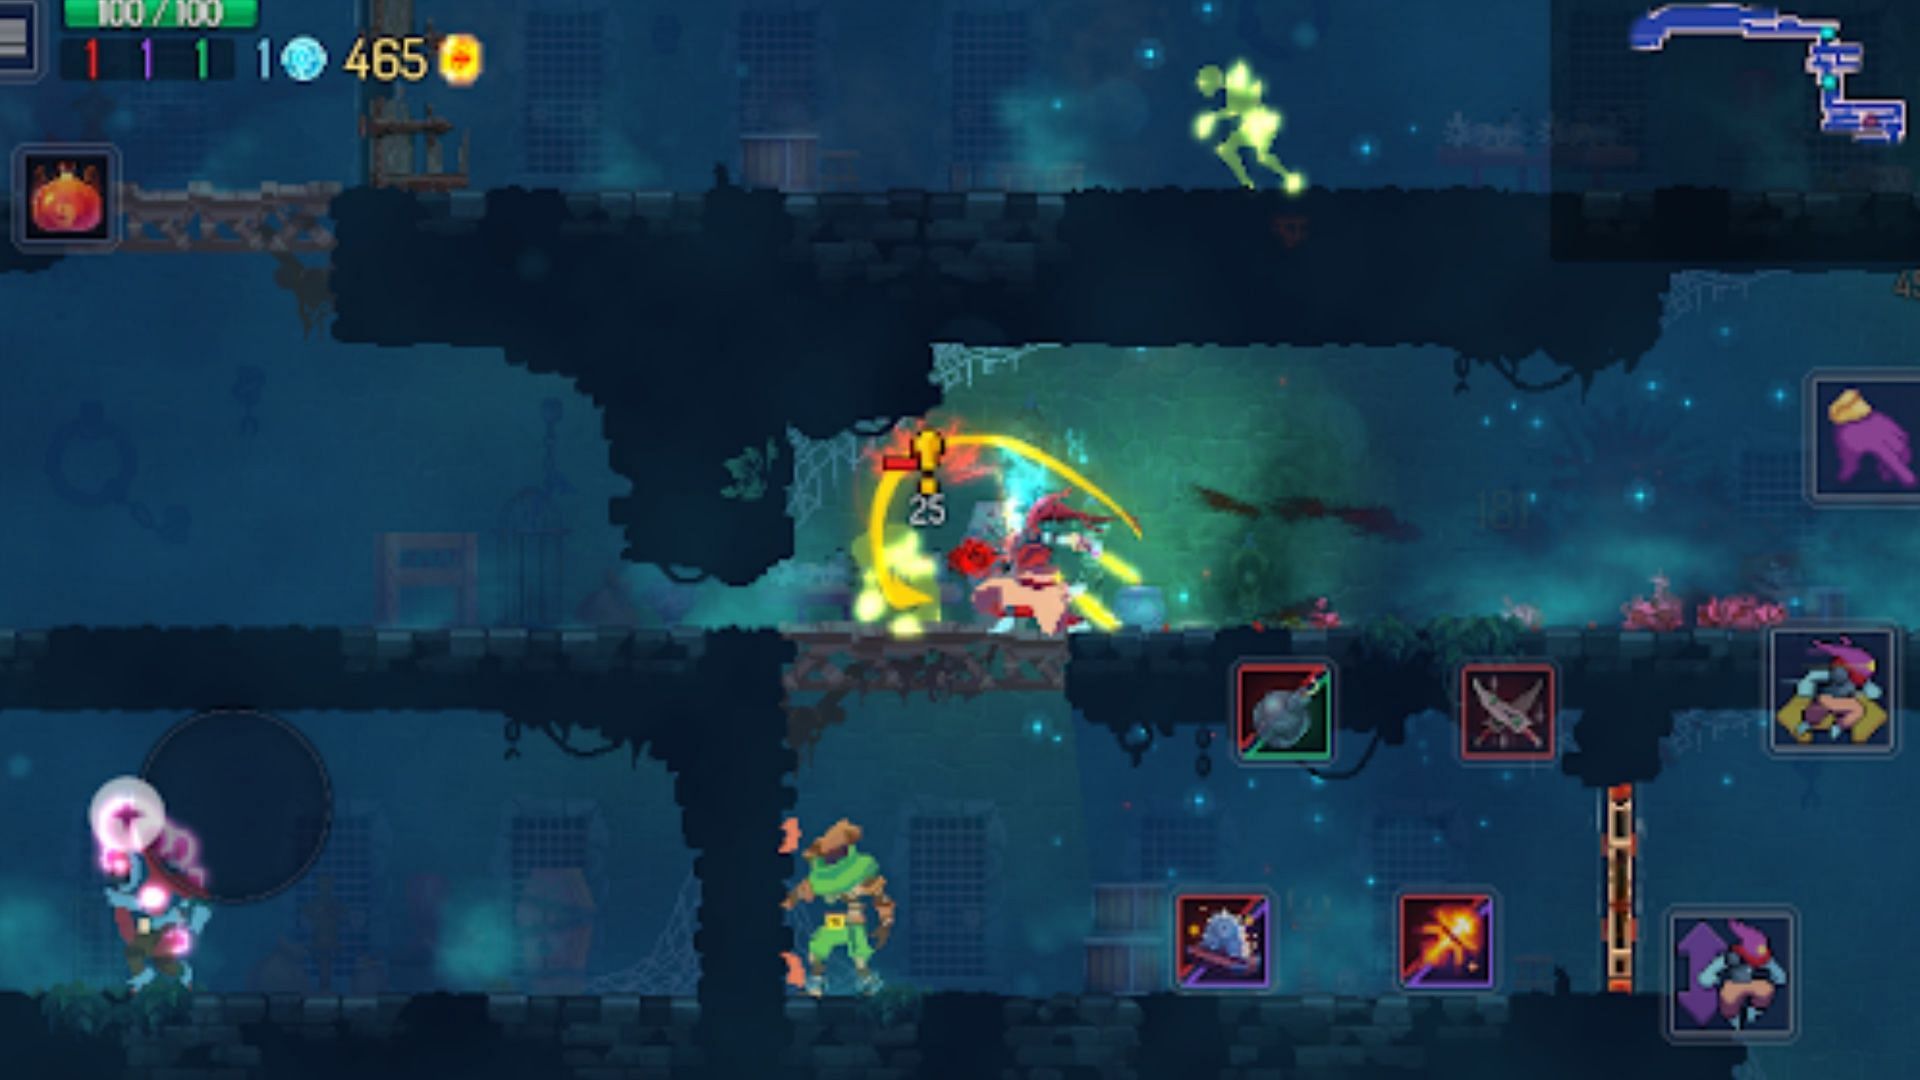 The ported version of Dead Cells has been available on Android devices for a few years now (Image via Playdigious)